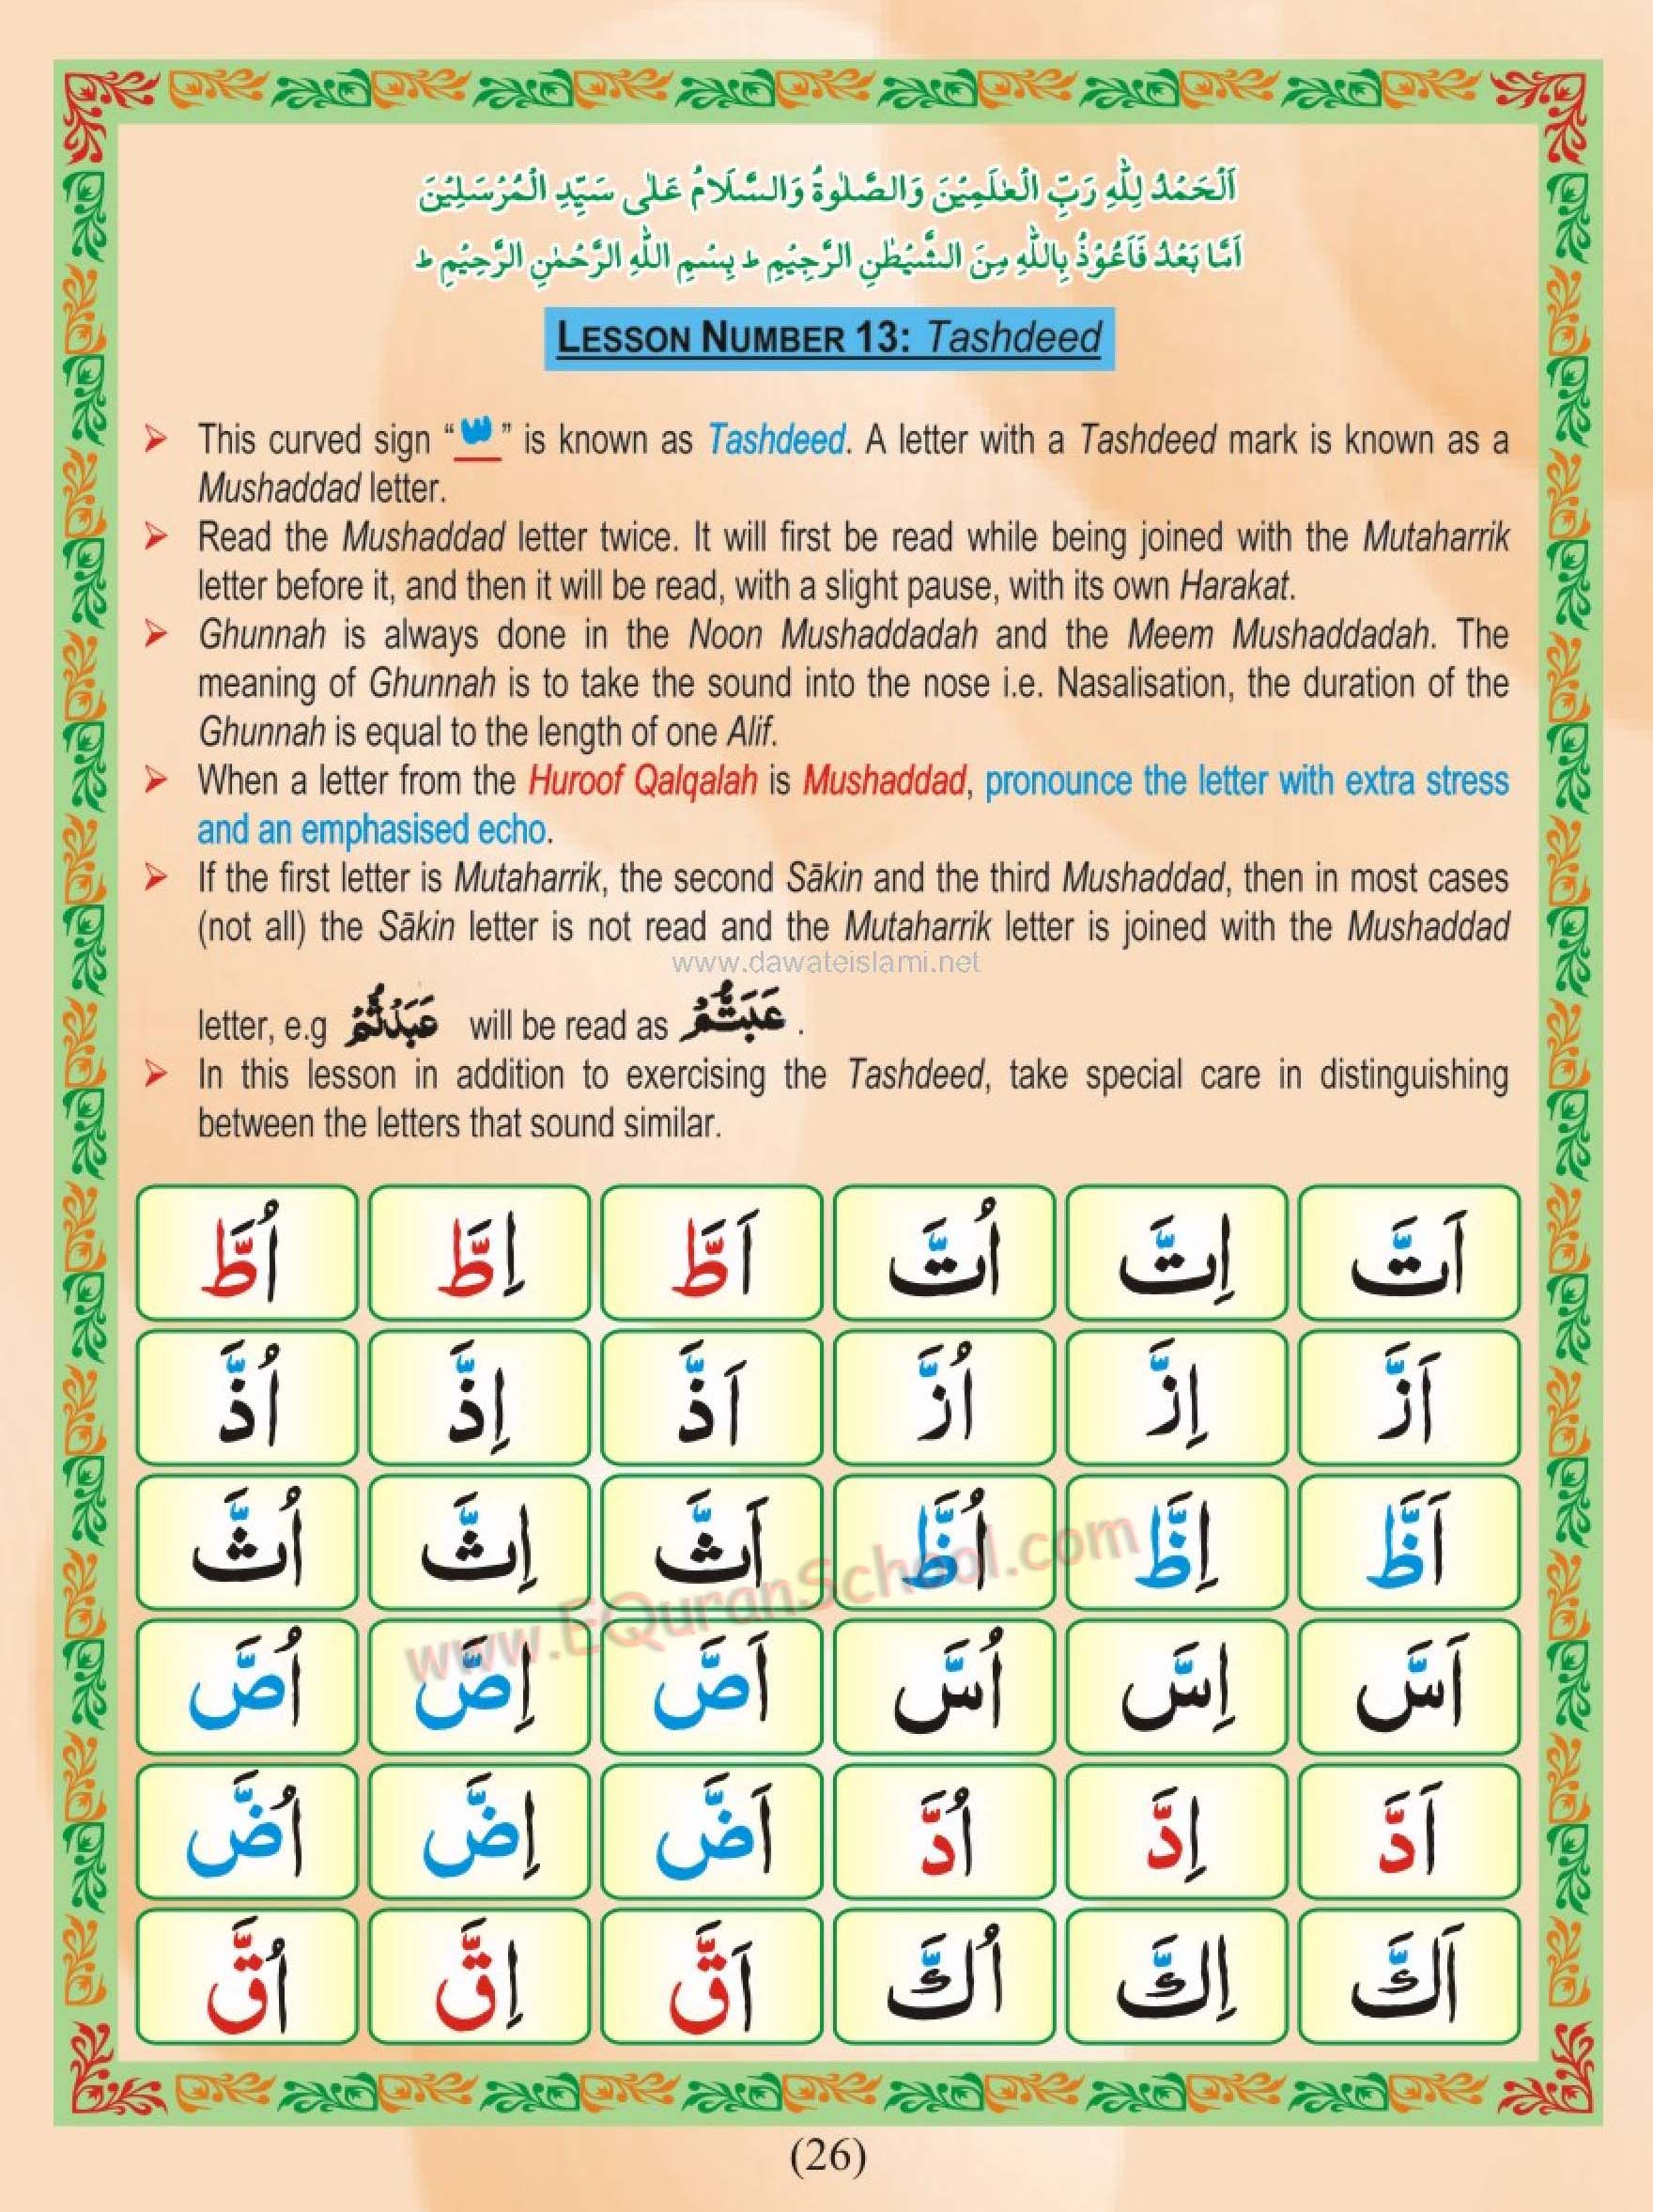 Exercise of mushaddad Letters